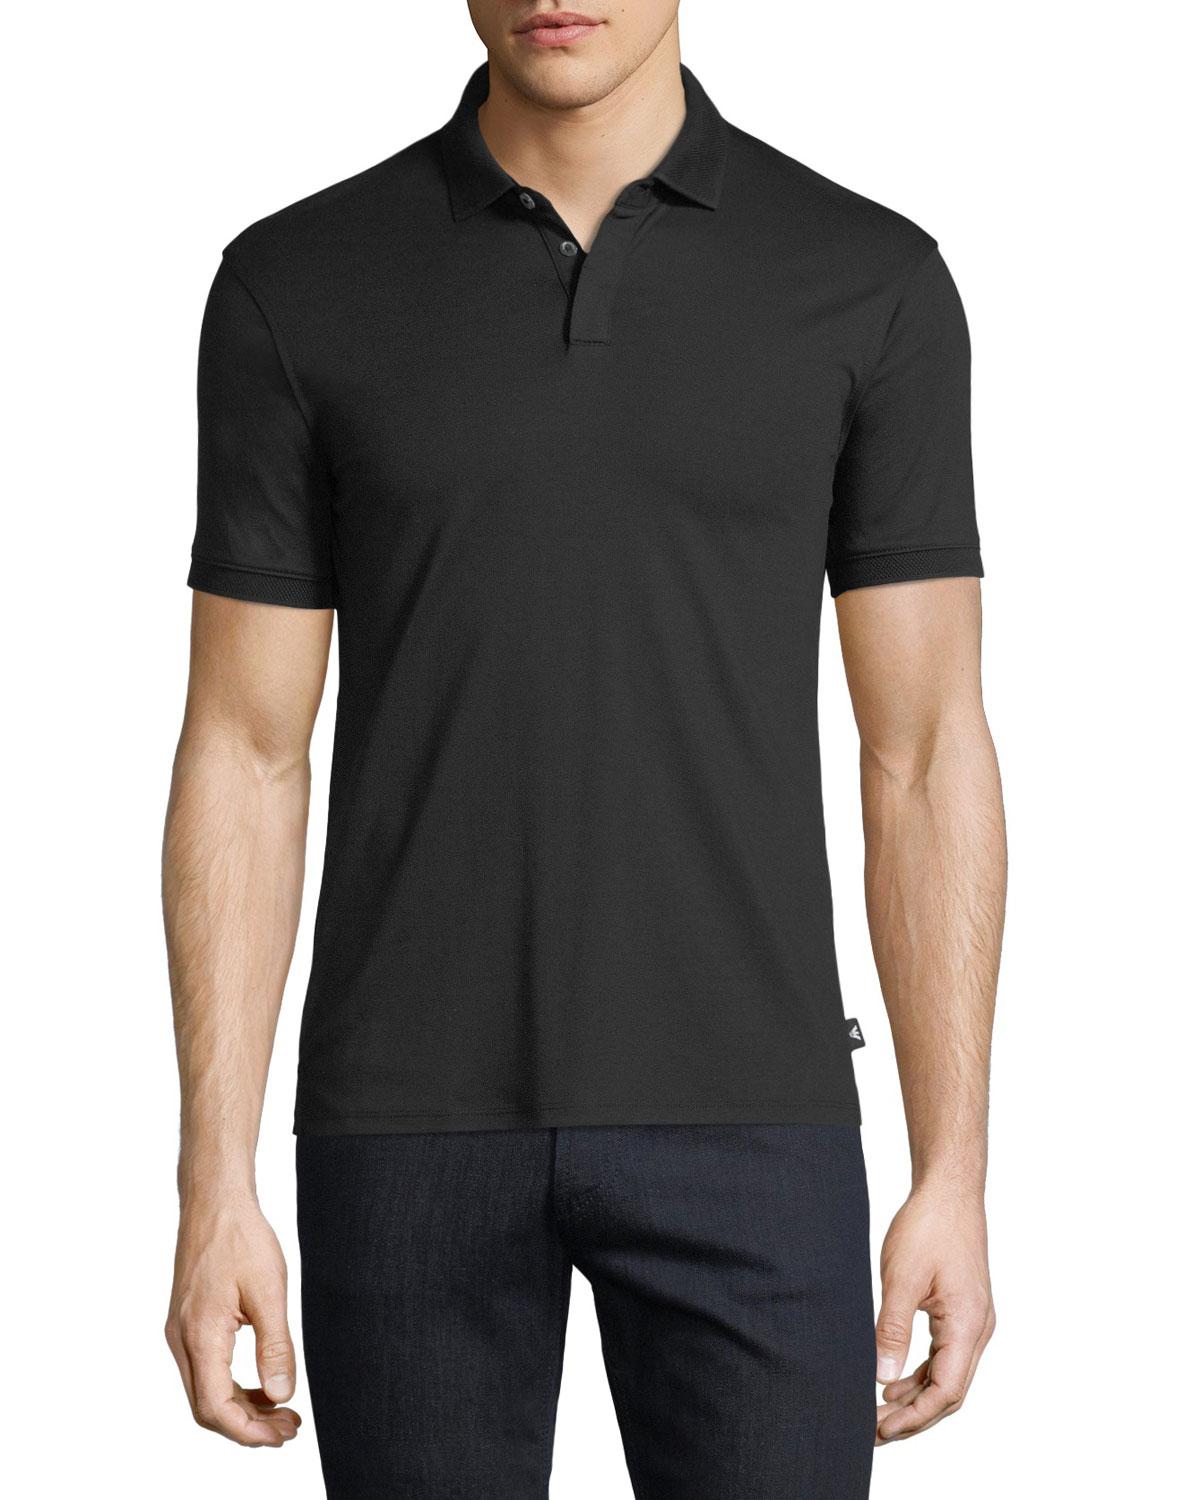 Emporio Armani Basic Textured Polo Shirt in Black for Men - Lyst